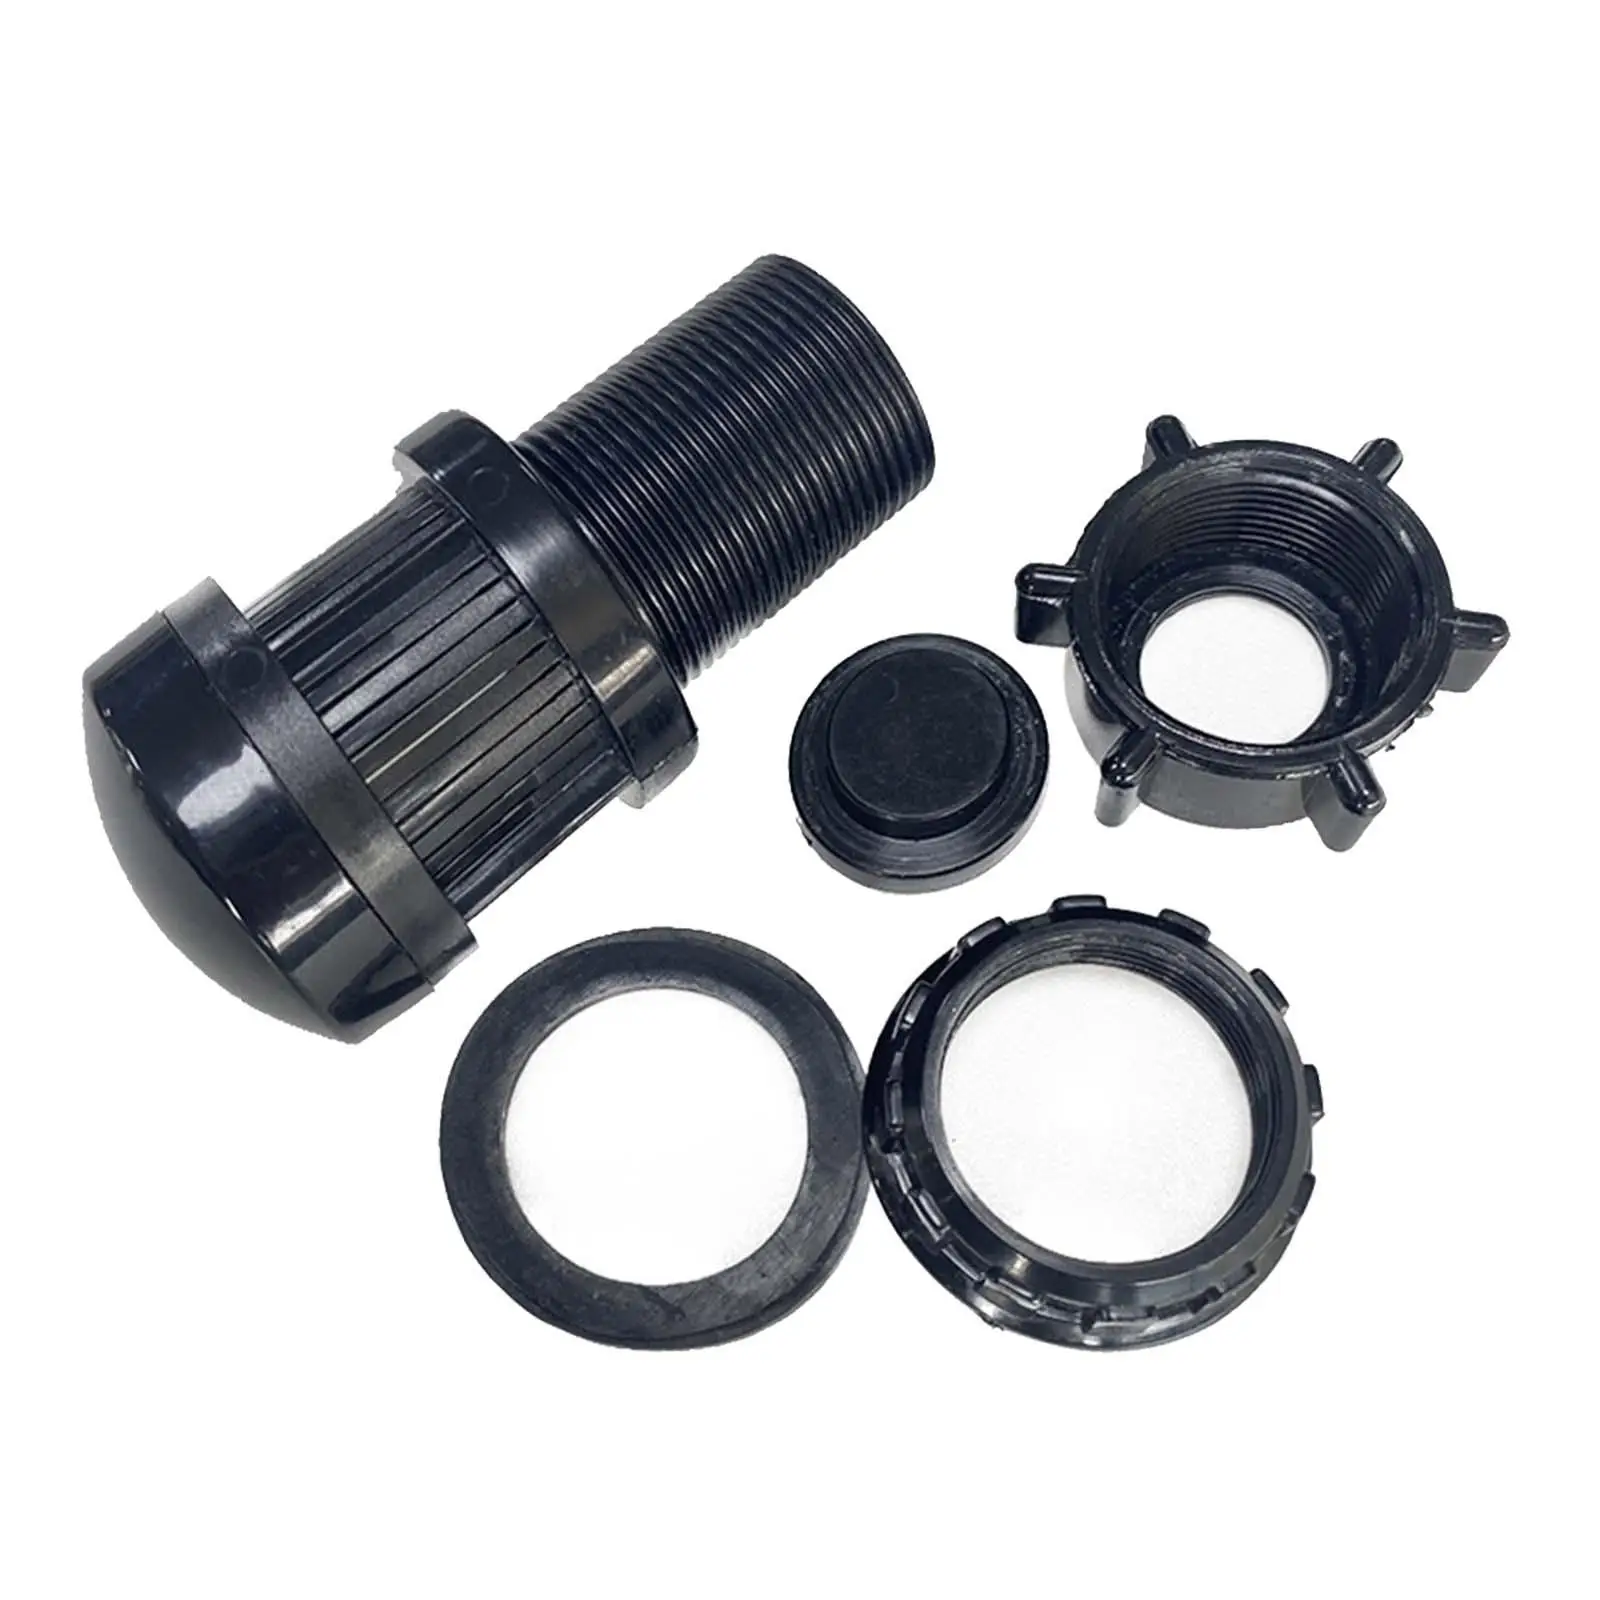 Sand Filter Drain Plug Assembly Water Drain Set for Sand Tank Maintenance